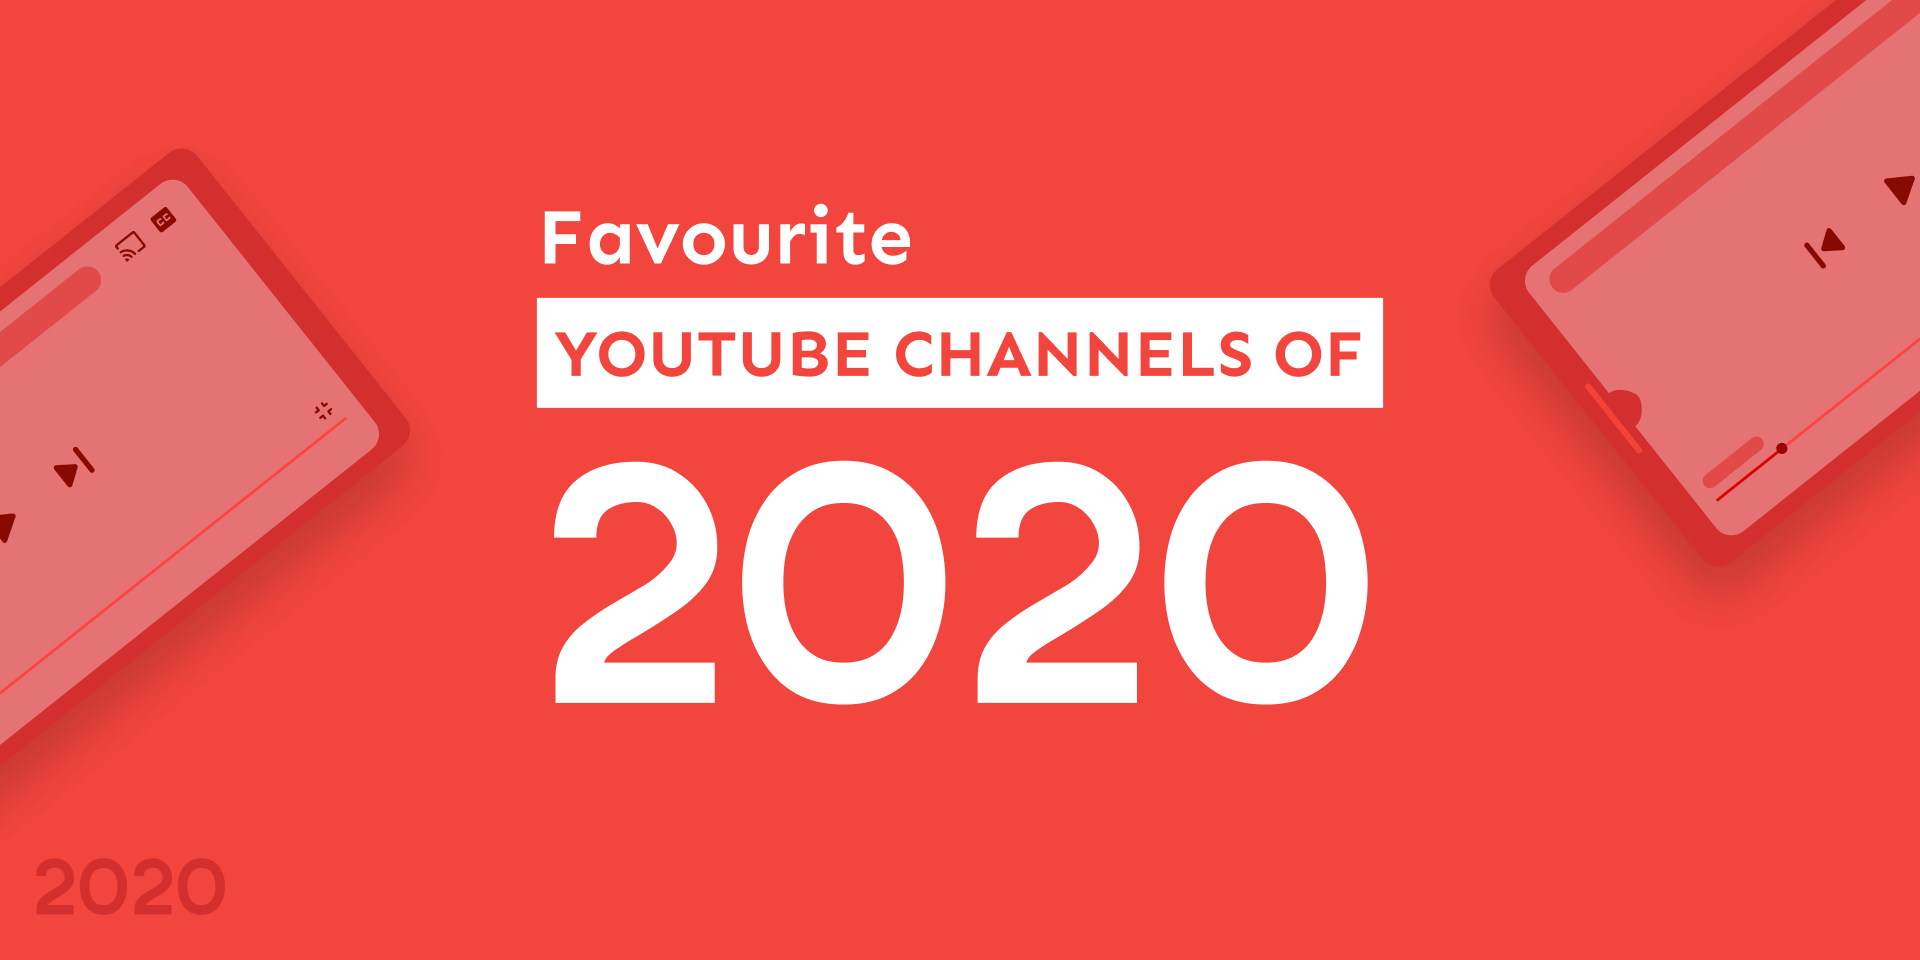 Favourite YouTube Channels of 2020